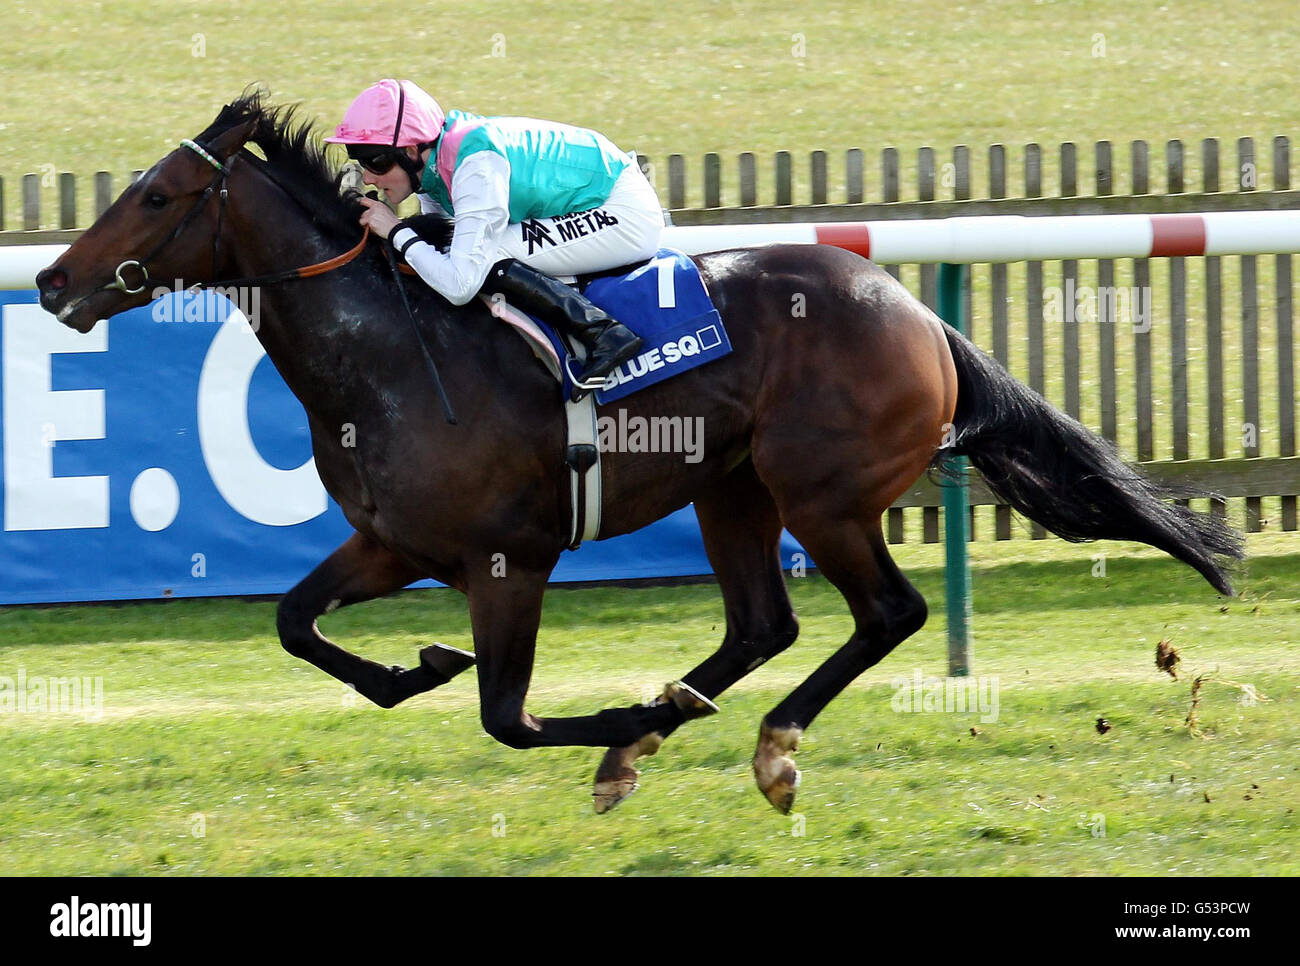 Stipulate, ridden by Tom Queally goes on to win the Blue Square Feilden Stakes during the Craven Meeting at Newmarket Racecourse, Newmarket. Stock Photo